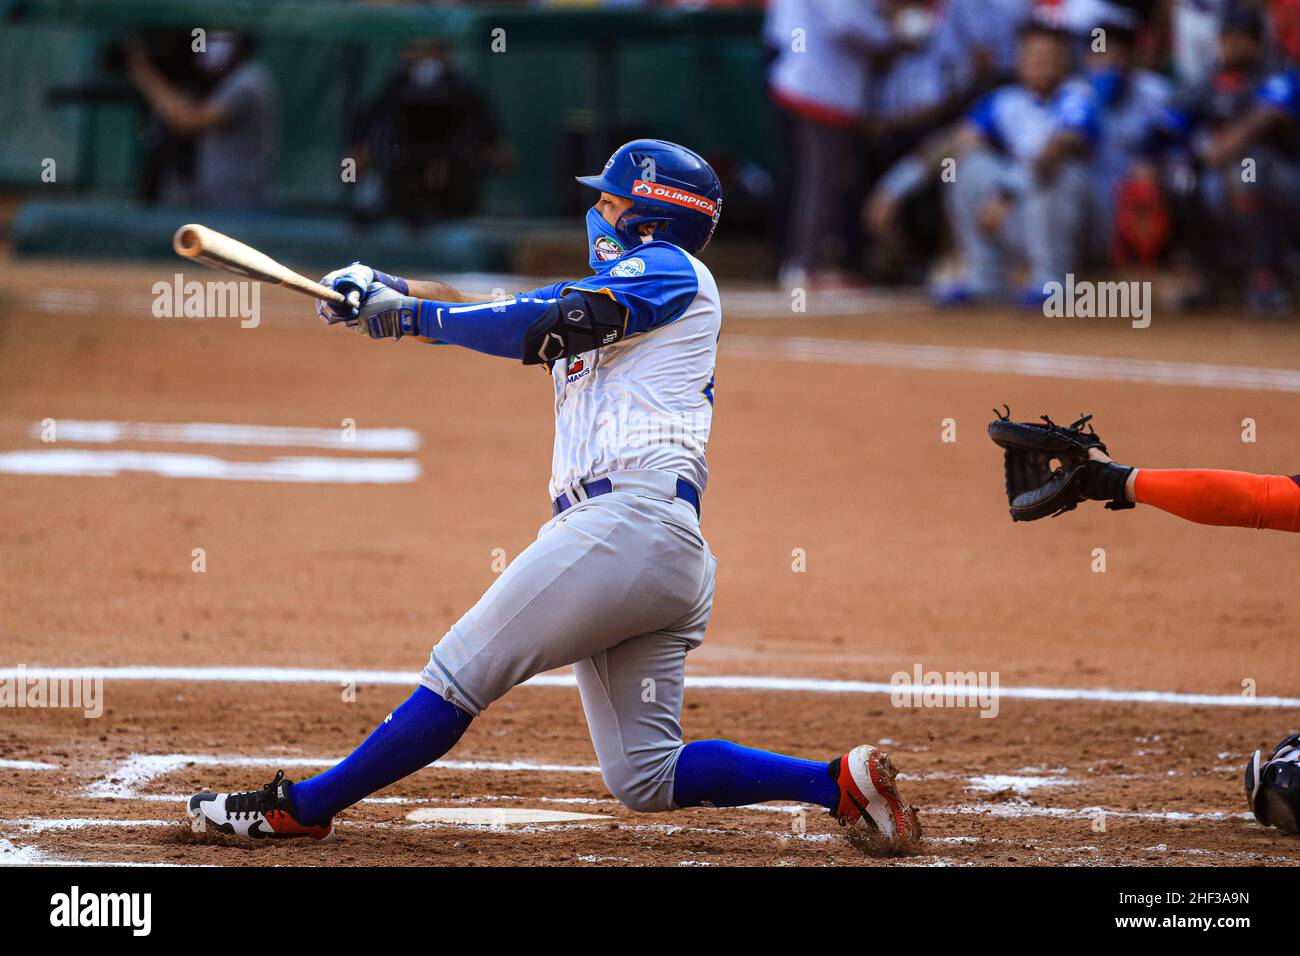 MAZATLAN, MEXICO - FEBRUARY 02: Robinson Javier Cabrera of Los Caimanes de  Barranquilla in his turn at bat,, during the game between Colombia and  Venezuela as part of Serie del Caribe 2021